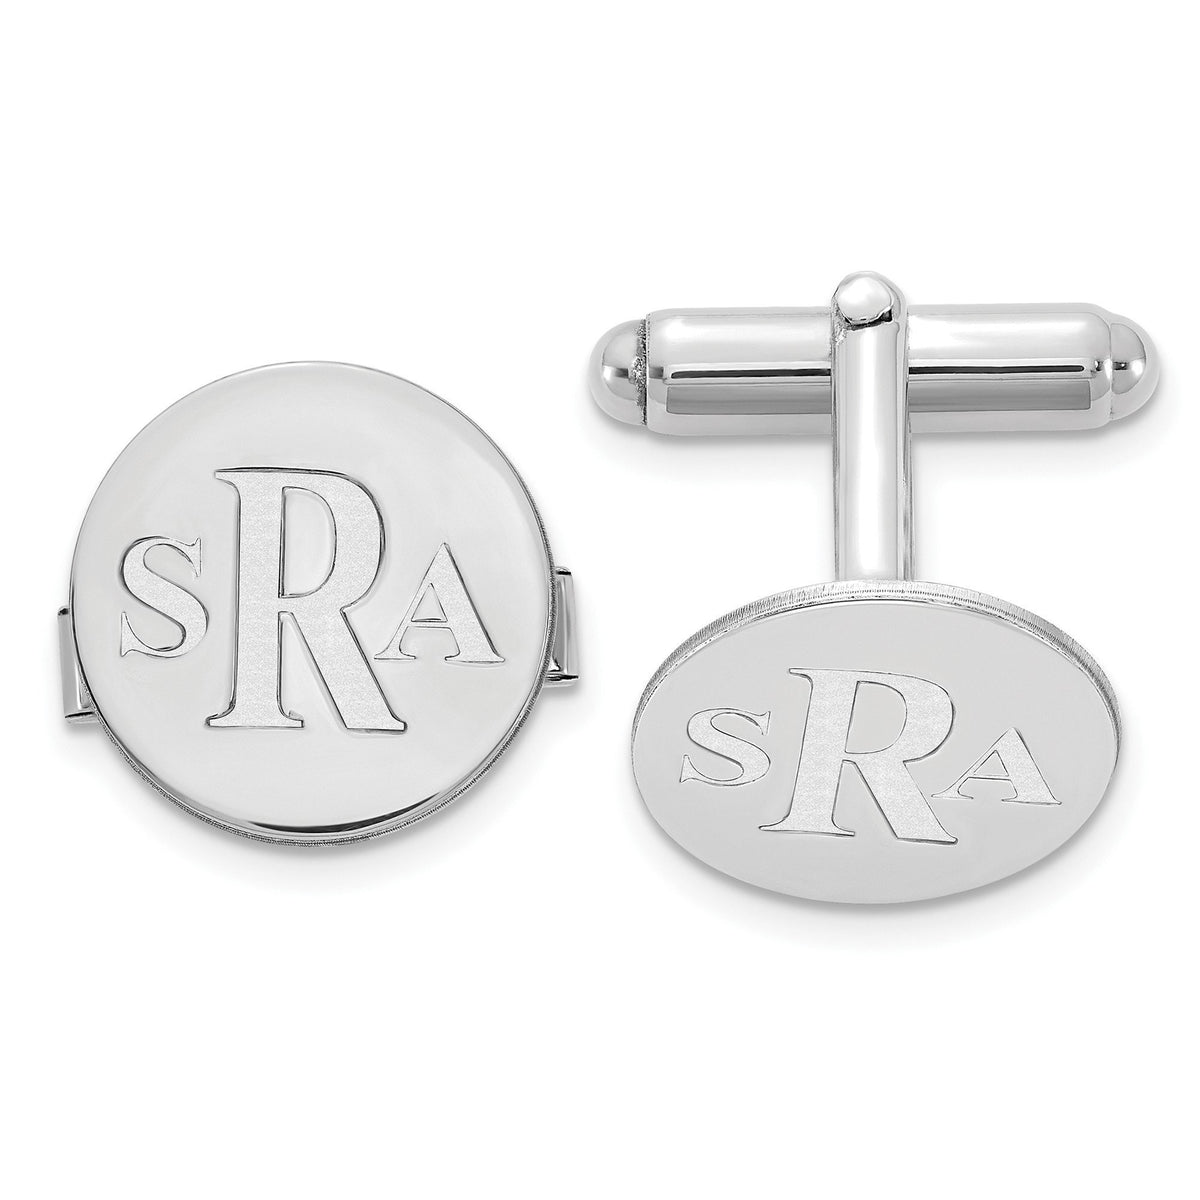 Circle Monogram Cufflinks Recessed Letters Available in Sterling Silver, White, Yellow & Rose Gold - Gift Box Included